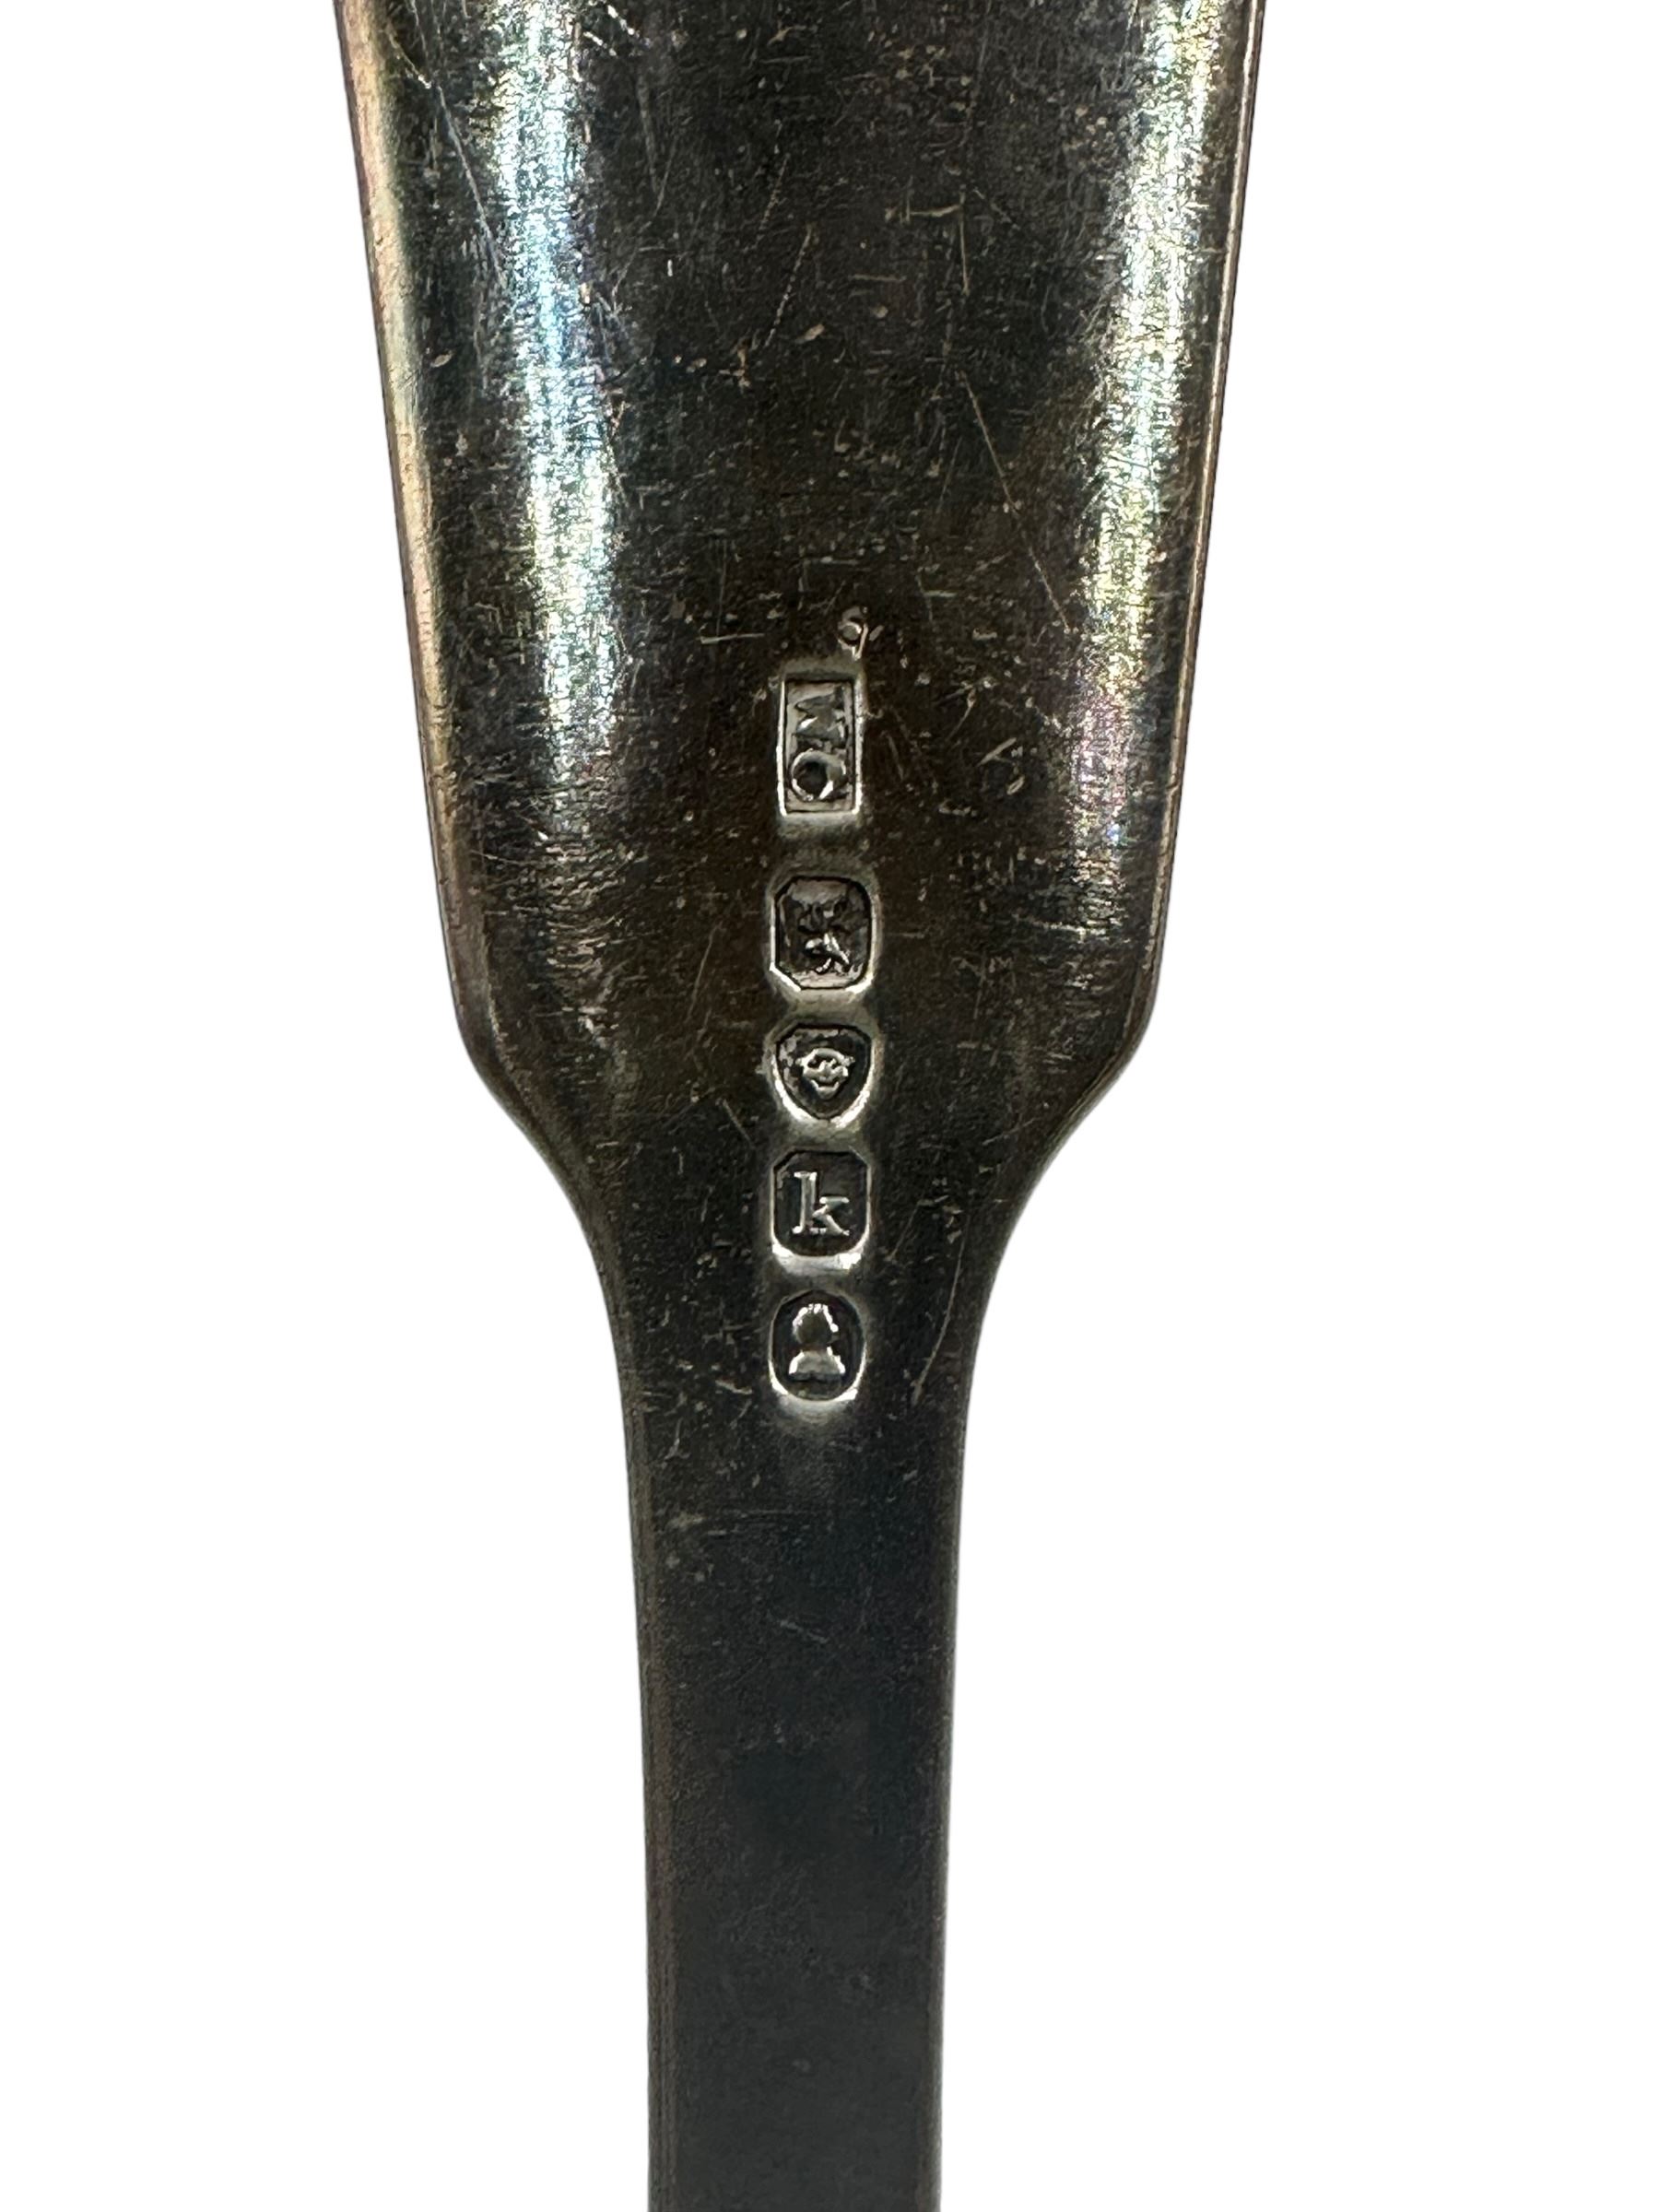 George IV silver fiddle pattern soup ladle engraved with initials London 1825 Maker William Chawner - Image 3 of 5